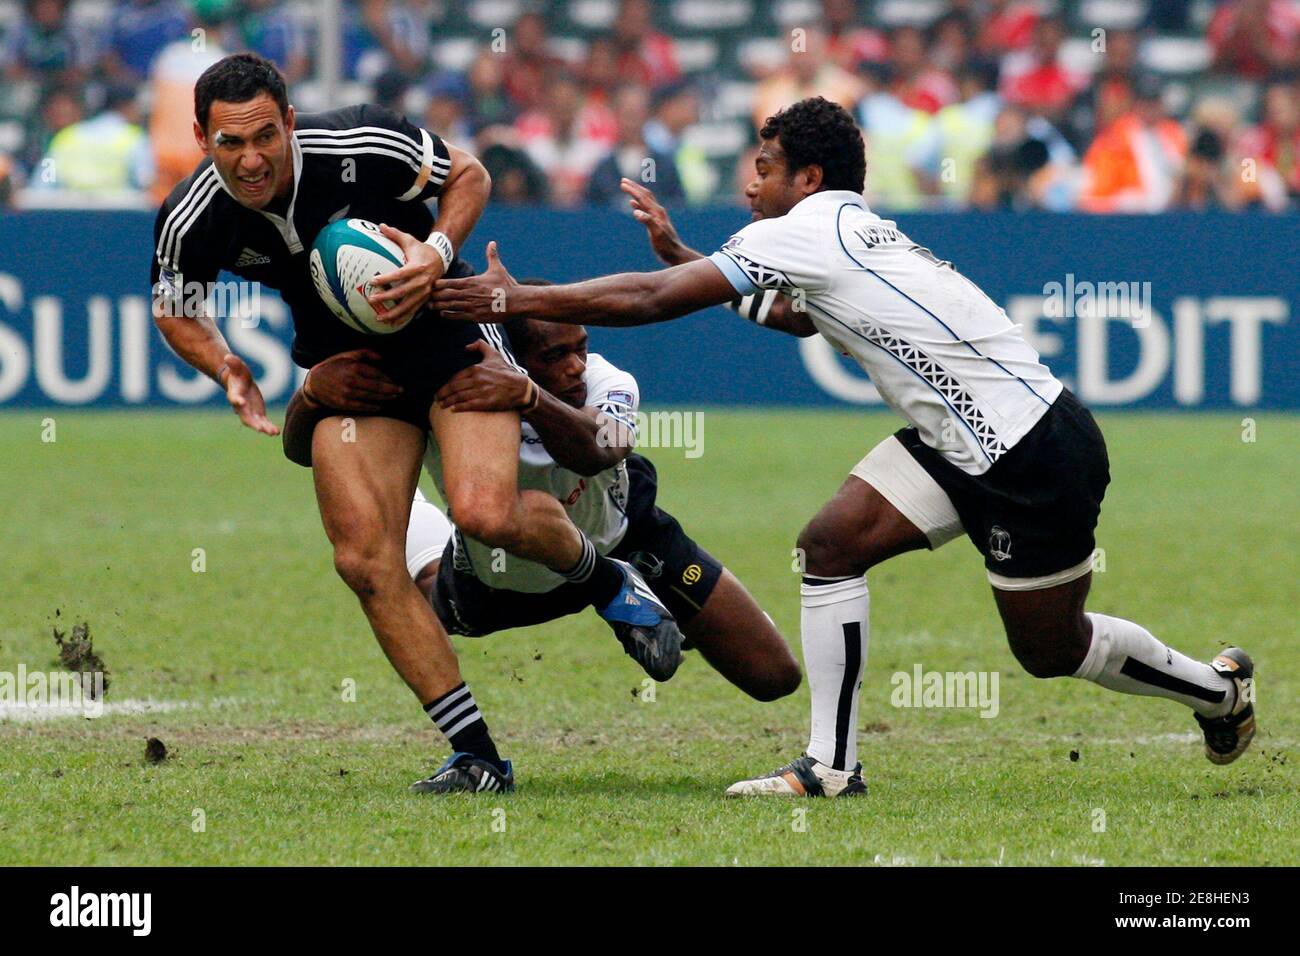 New Zealand's Zar Lawrence (L) is tackled by Fuji's Jiuta Lutumailagi (R) and Watisoni Votu during the Cup semi finals of the Hong Kong Sevens rugby tournament March 28, 2010. REUTERS/Tyrone Siu  (CHINA - Tags: SPORT RUGBY) Stock Photo